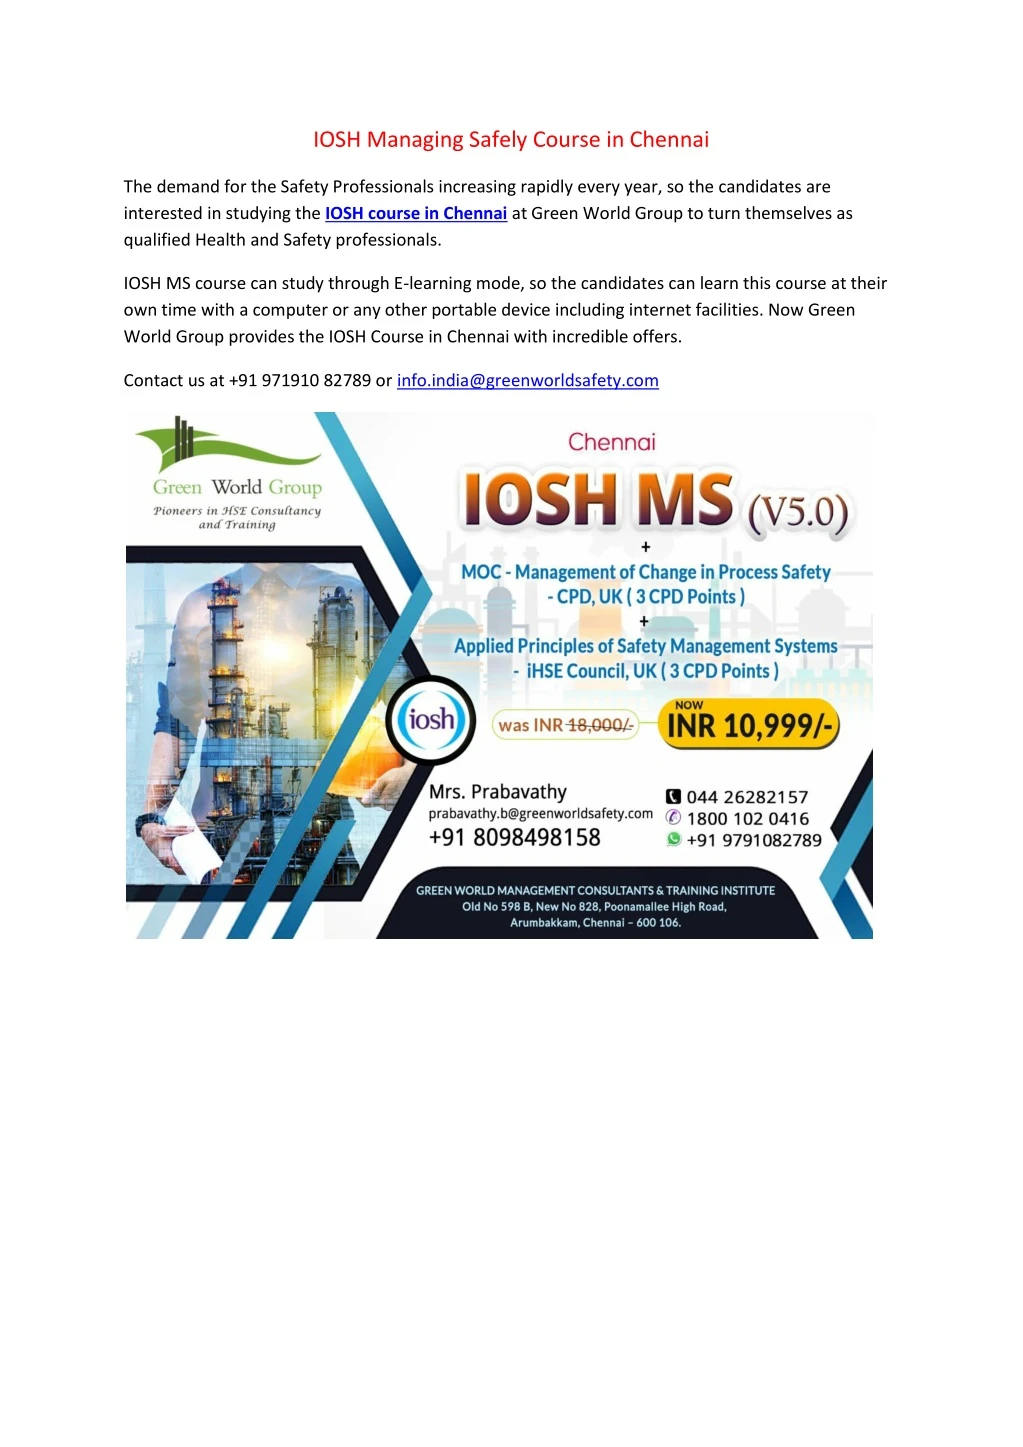 iosh managing safely course in chennai